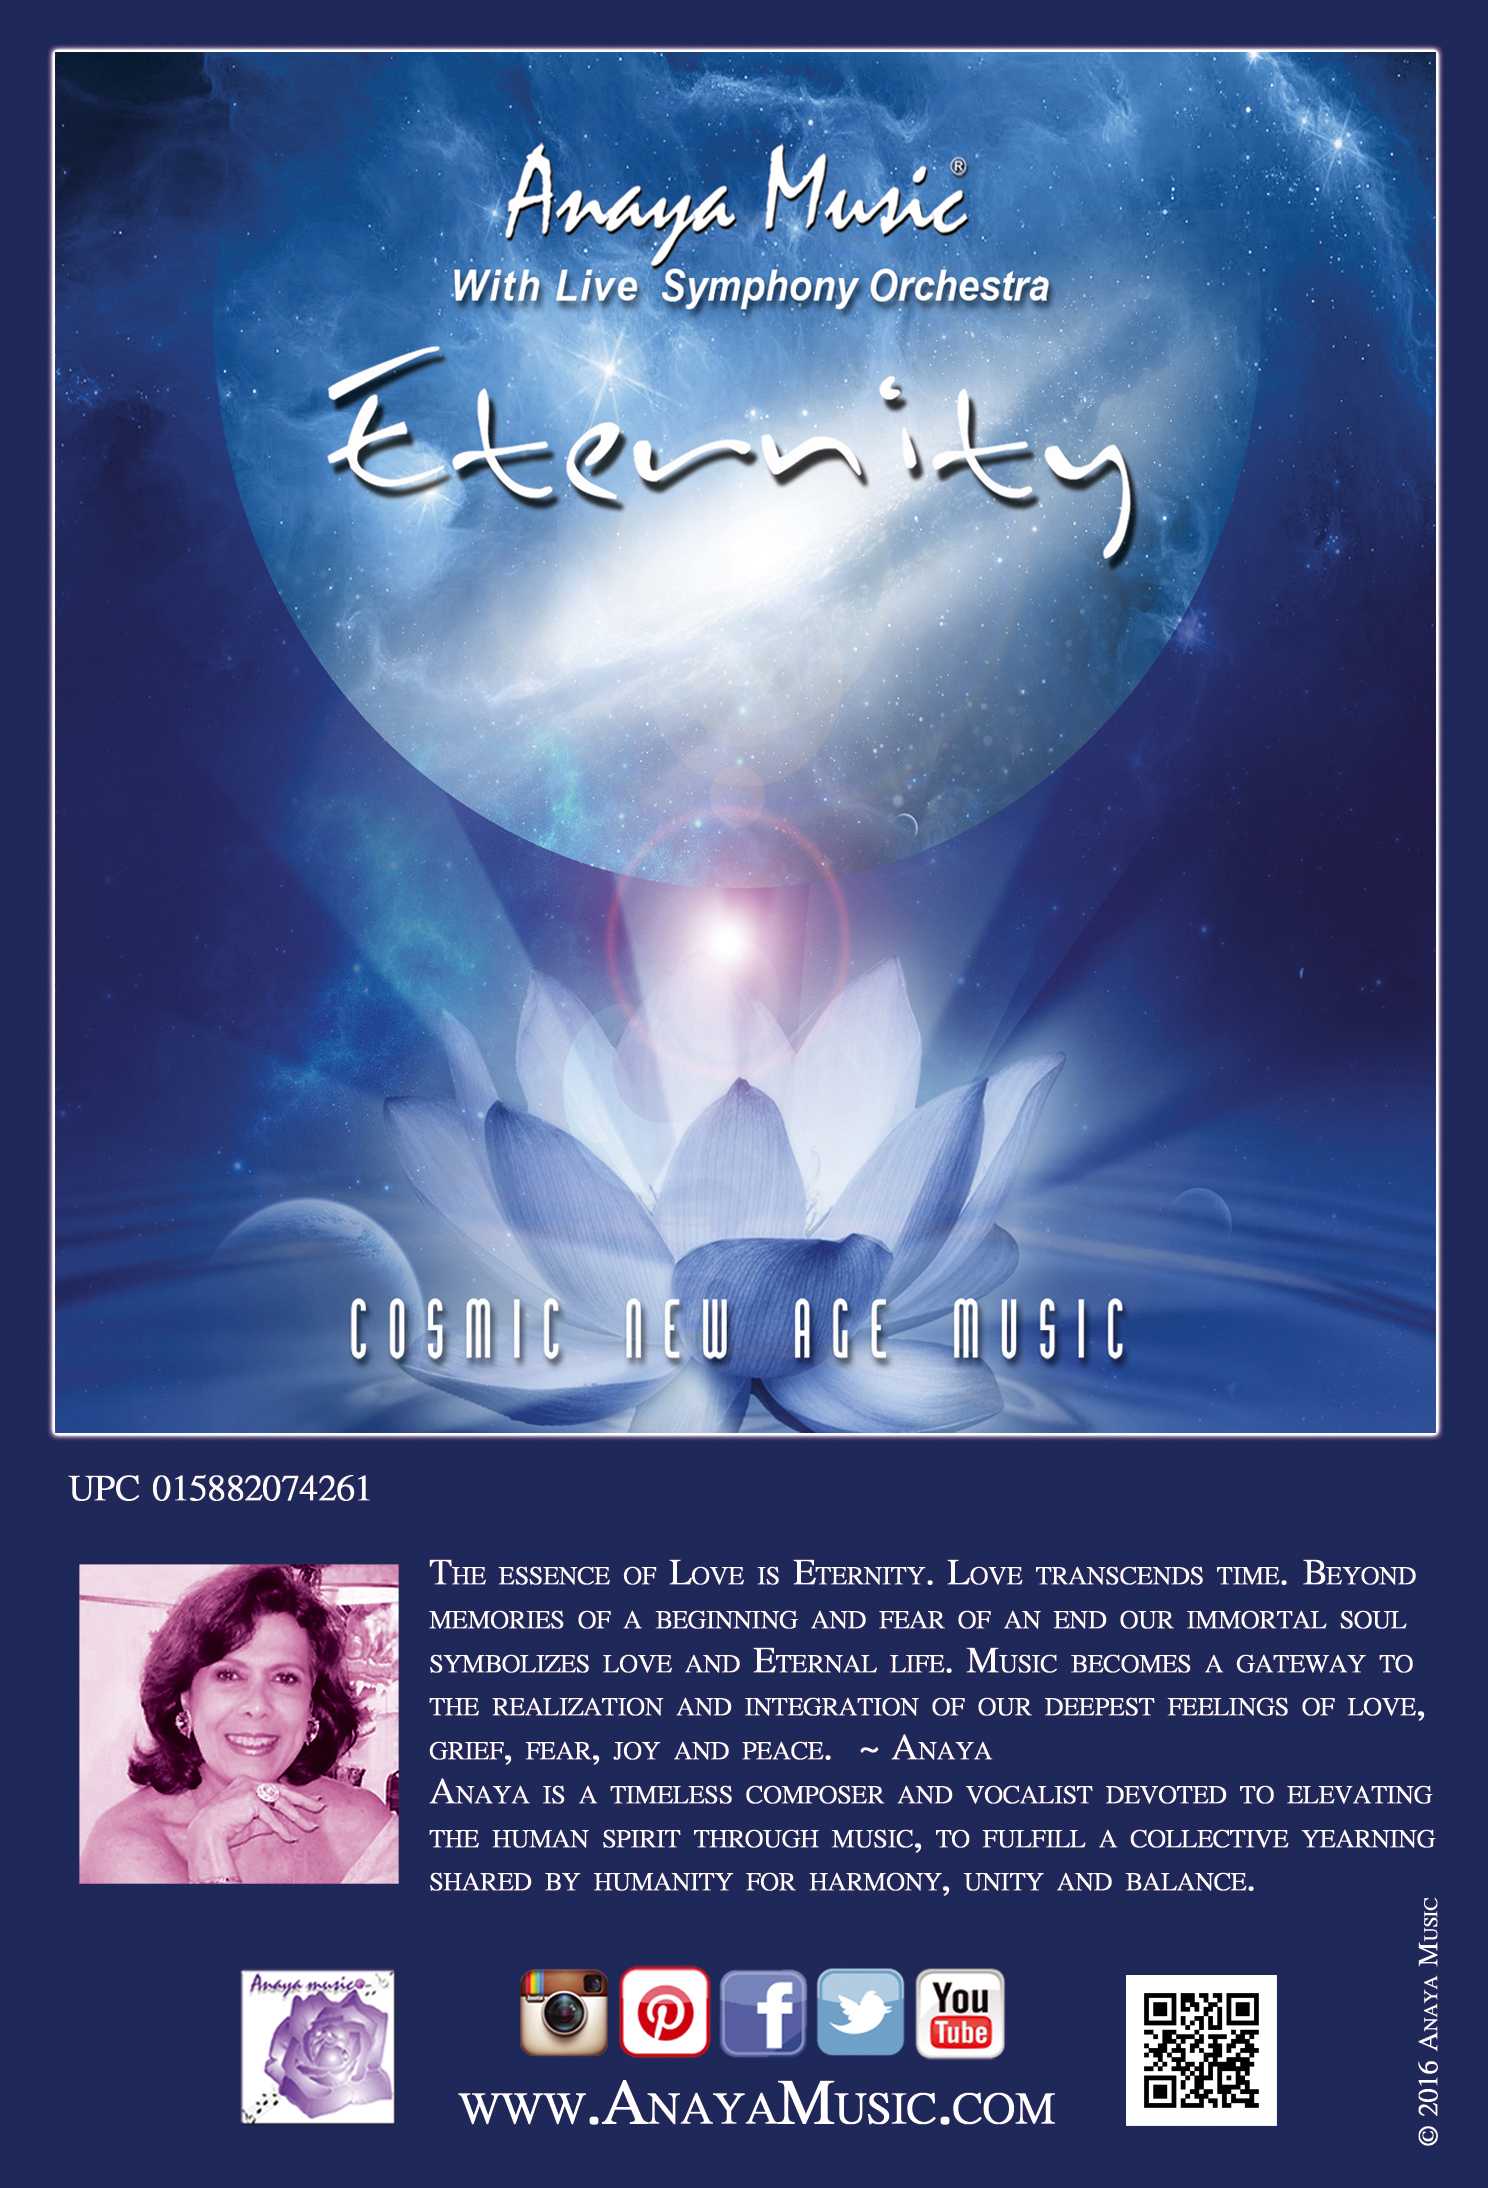 Promotional poster for Eternity.